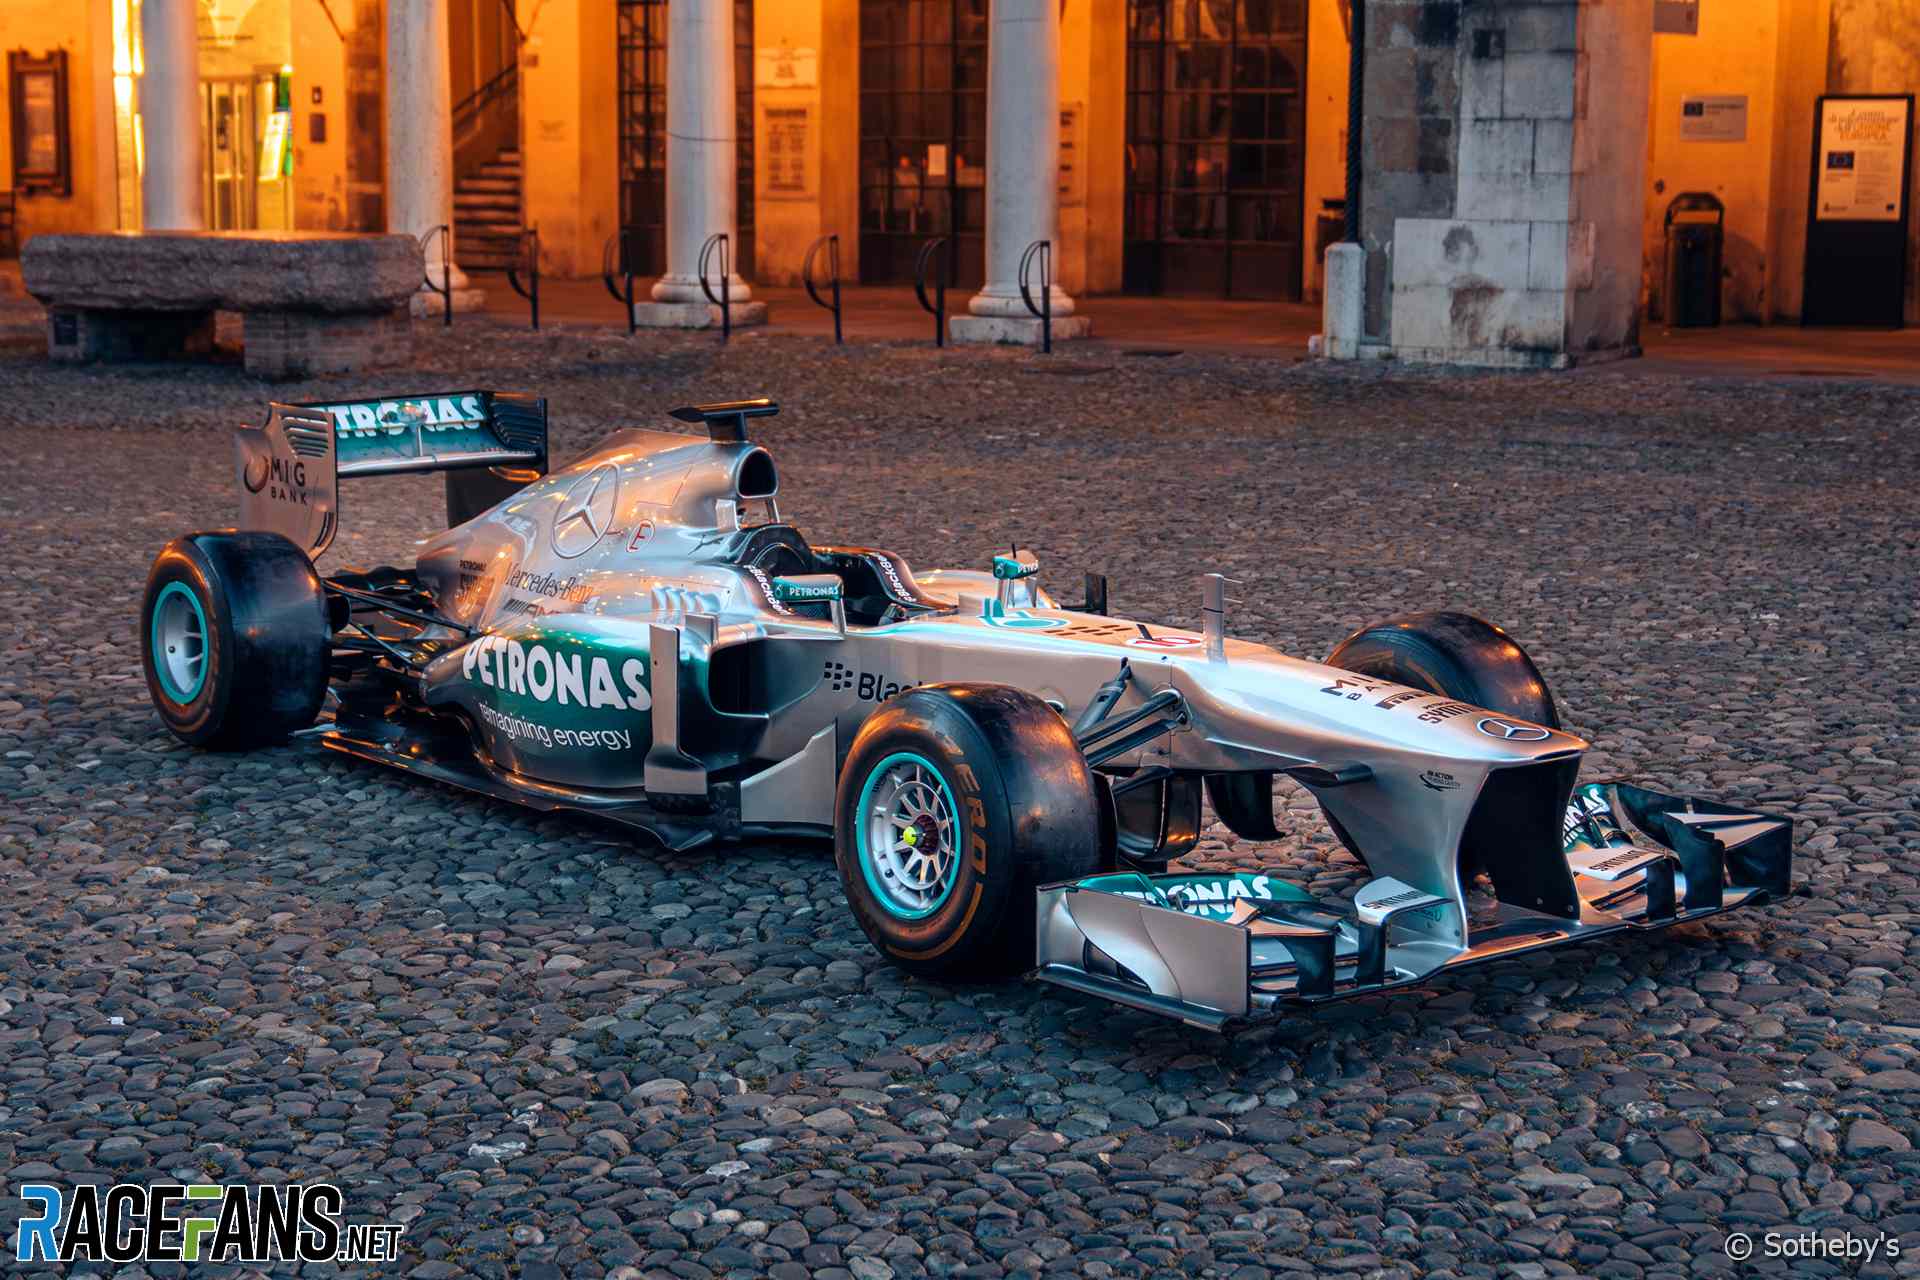 The 2013 Mercedes W04 raced by Lewis Hamilton which is being offered for sale